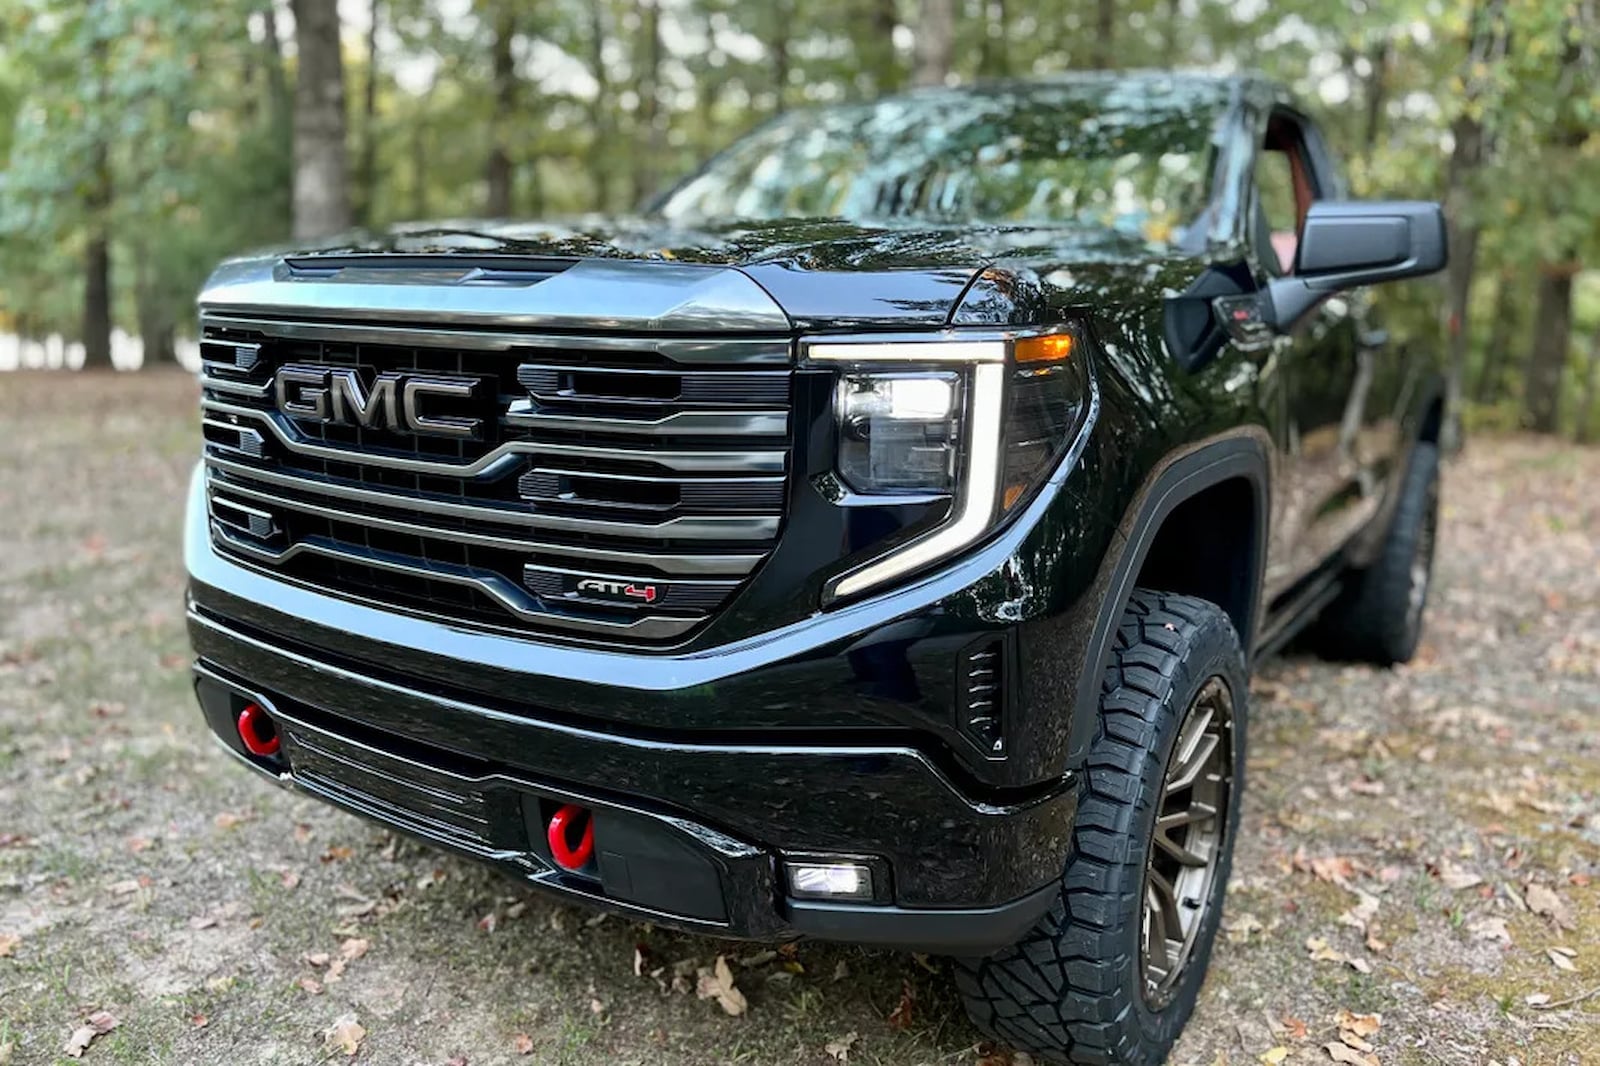 New Gmc Jimmy Headed To Sema 2022 Thanks To Flat Out Autos Carbuzz